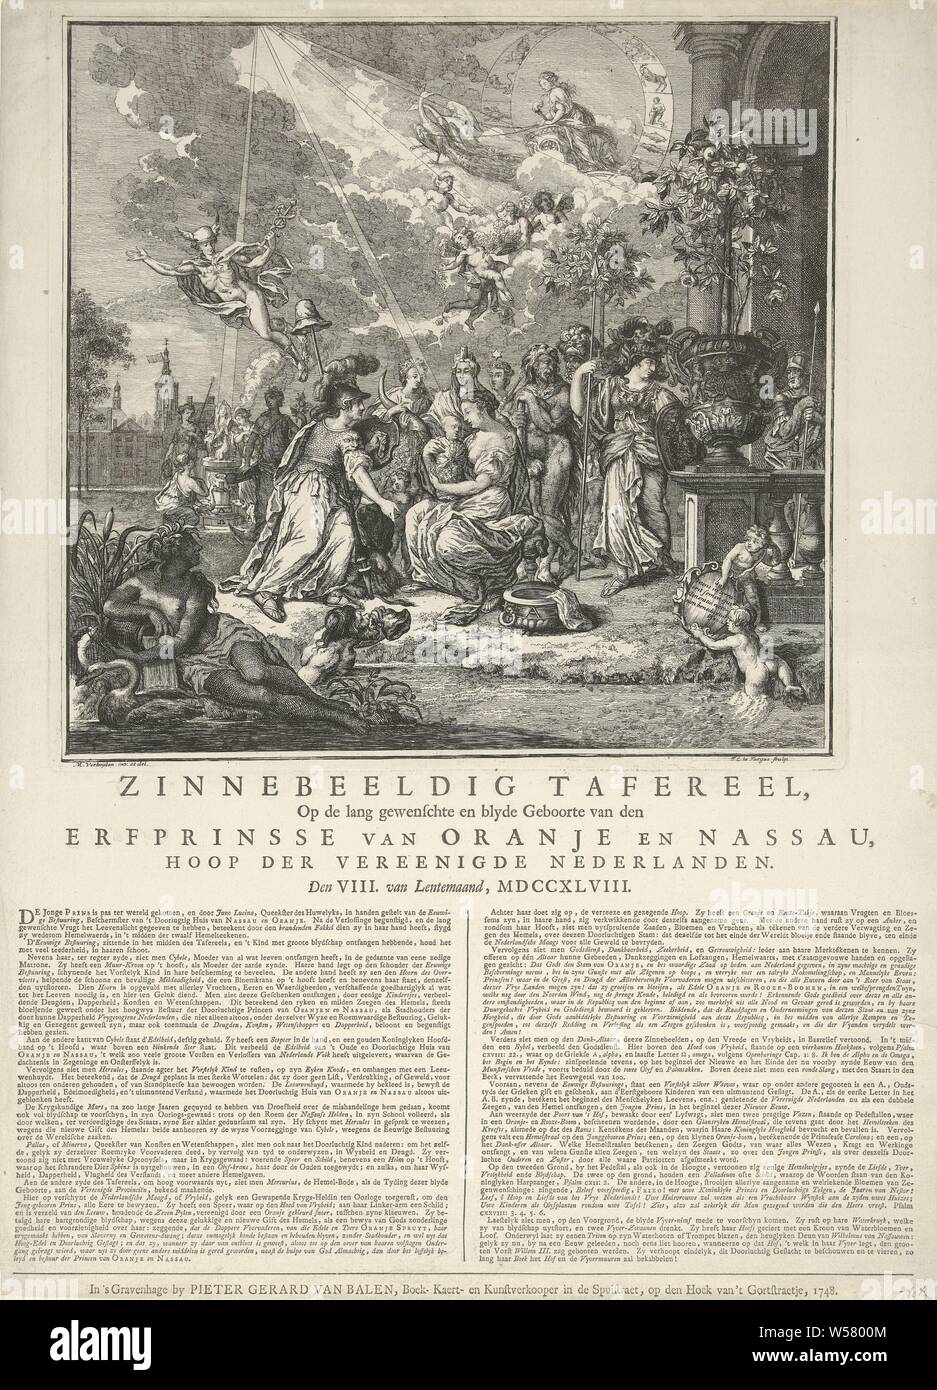 Allegory of the Birth of the Prince of Orange, 1748 Symbolic Scenery On the long-desired and blyde Birth of the Heir of the Orange and Nassau, Hope of the United Netherlands. The VIII. van Lentemaand, MDCCXLVIII (title on object), Allegory of the birth of William V, Prince of Orange, March 8, 1748. Central to the personification of the Eternal Government with the child in his arms, surrounded by all sorts of allegorical figures, gods and goddesses, on the left the Dutch Virgin. On the right, the Orange tree and the English rose grow in a vase. In the sky Mercury and Juno in her chariot pulled Stock Photo